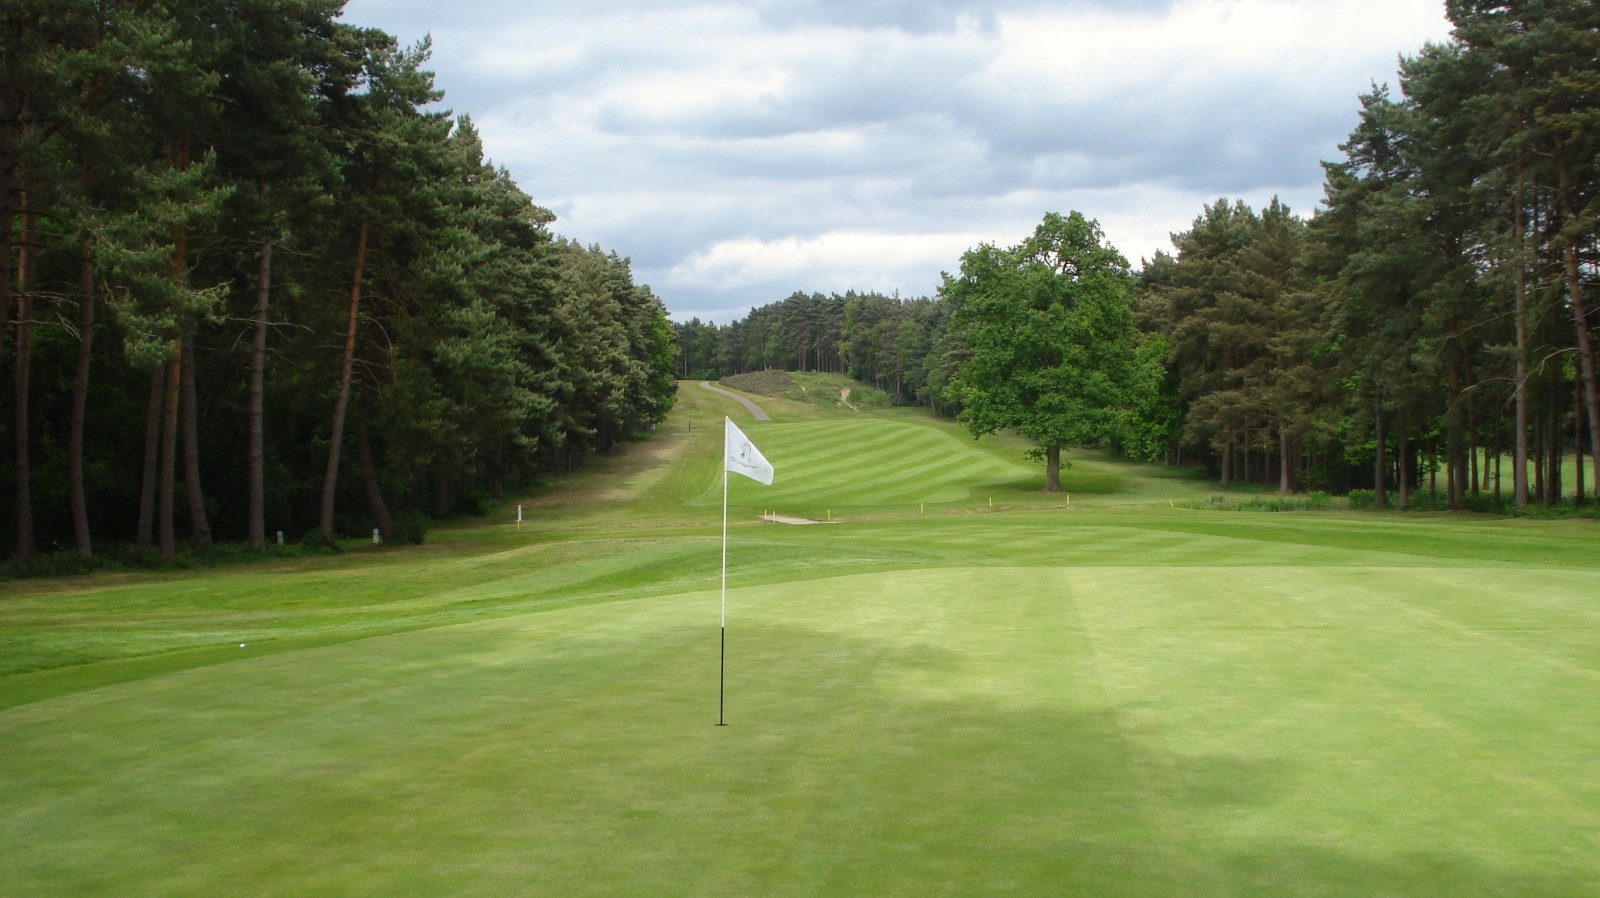 Foxhills in Surrey will host the PGA Cup in September